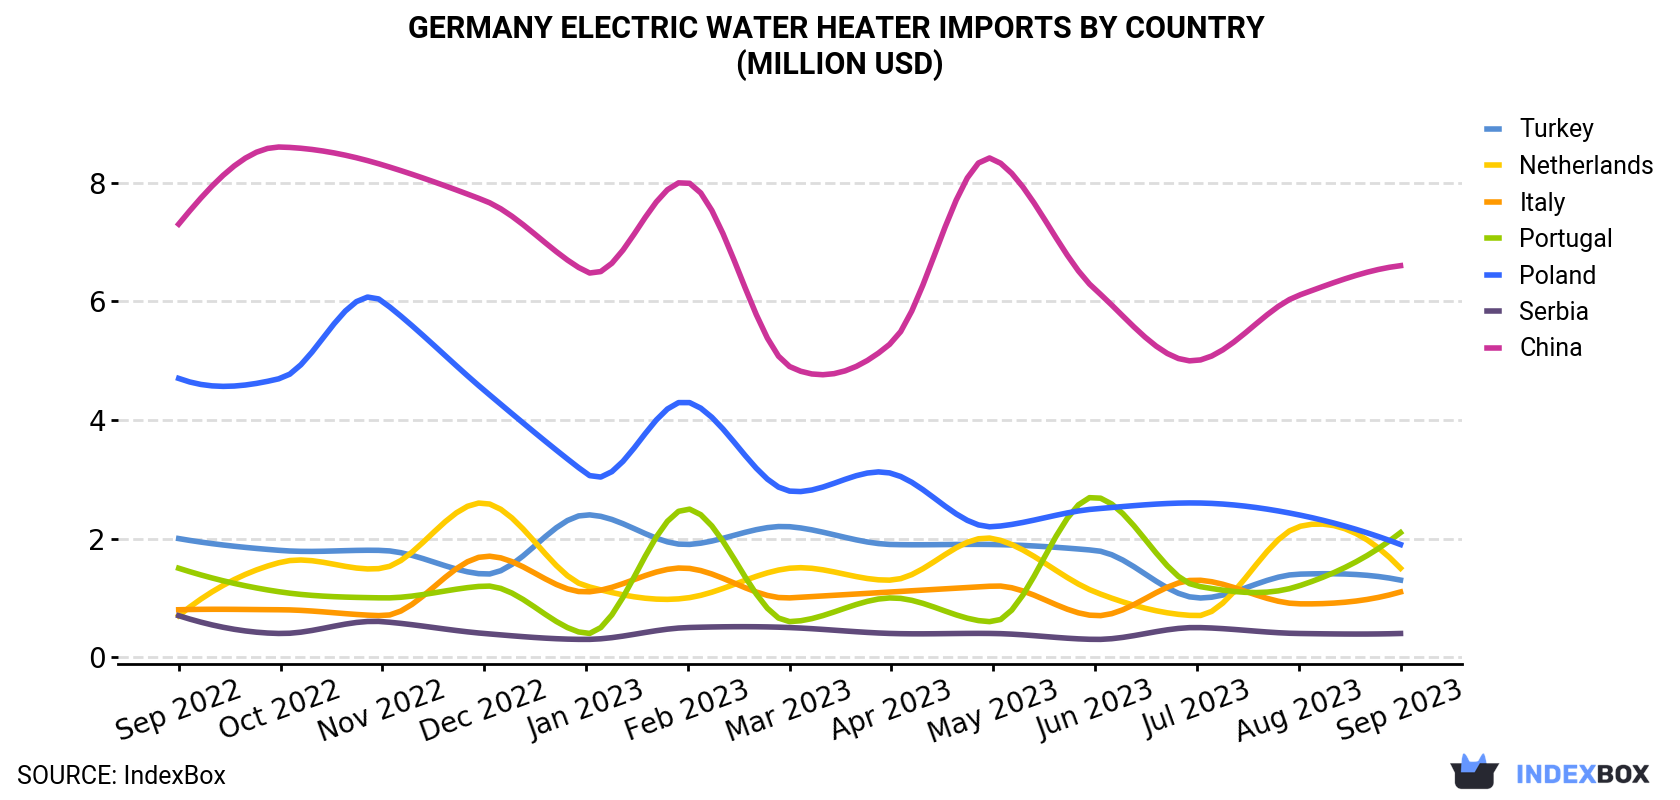 Germany Electric Water Heater Imports By Country (Million USD)